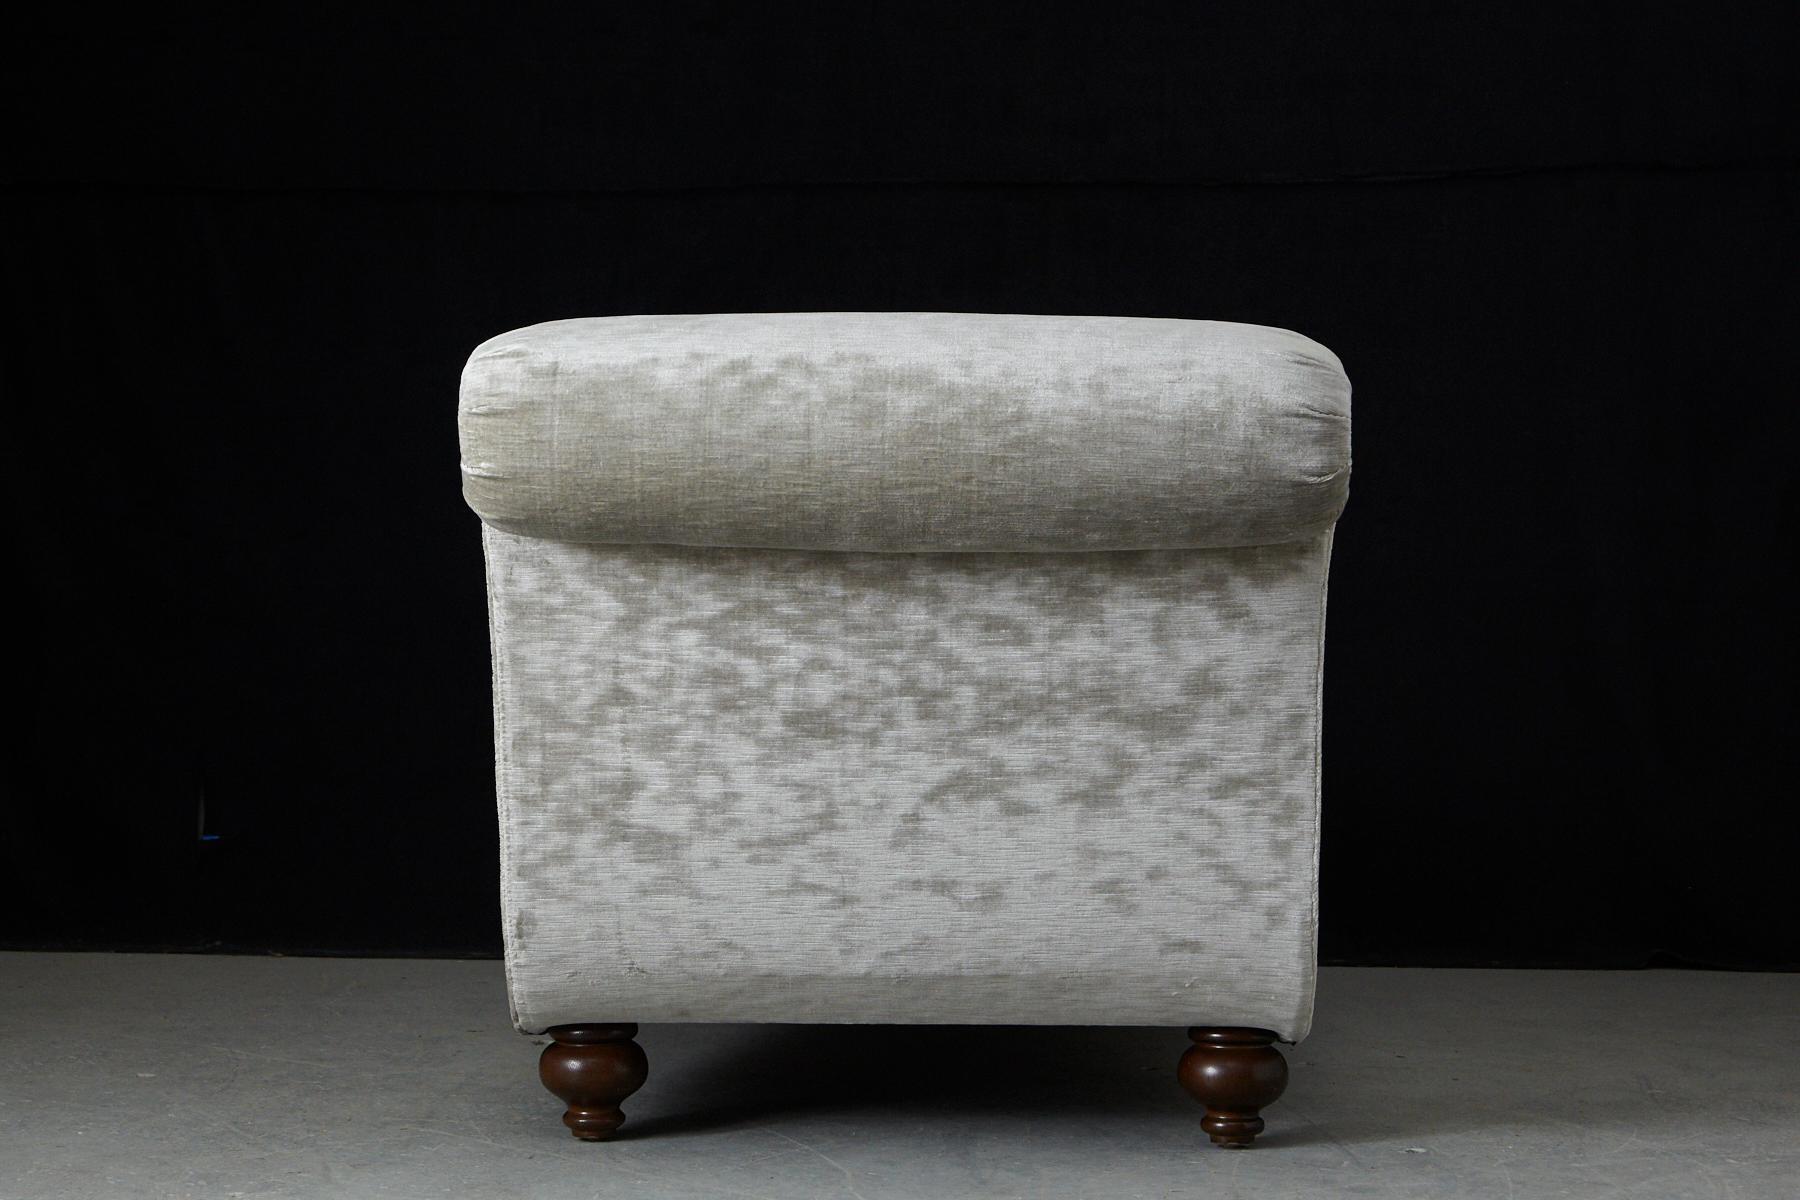 French Chaise Longue with New Upholstery in Striae Velvet, circa 1930s For Sale 10